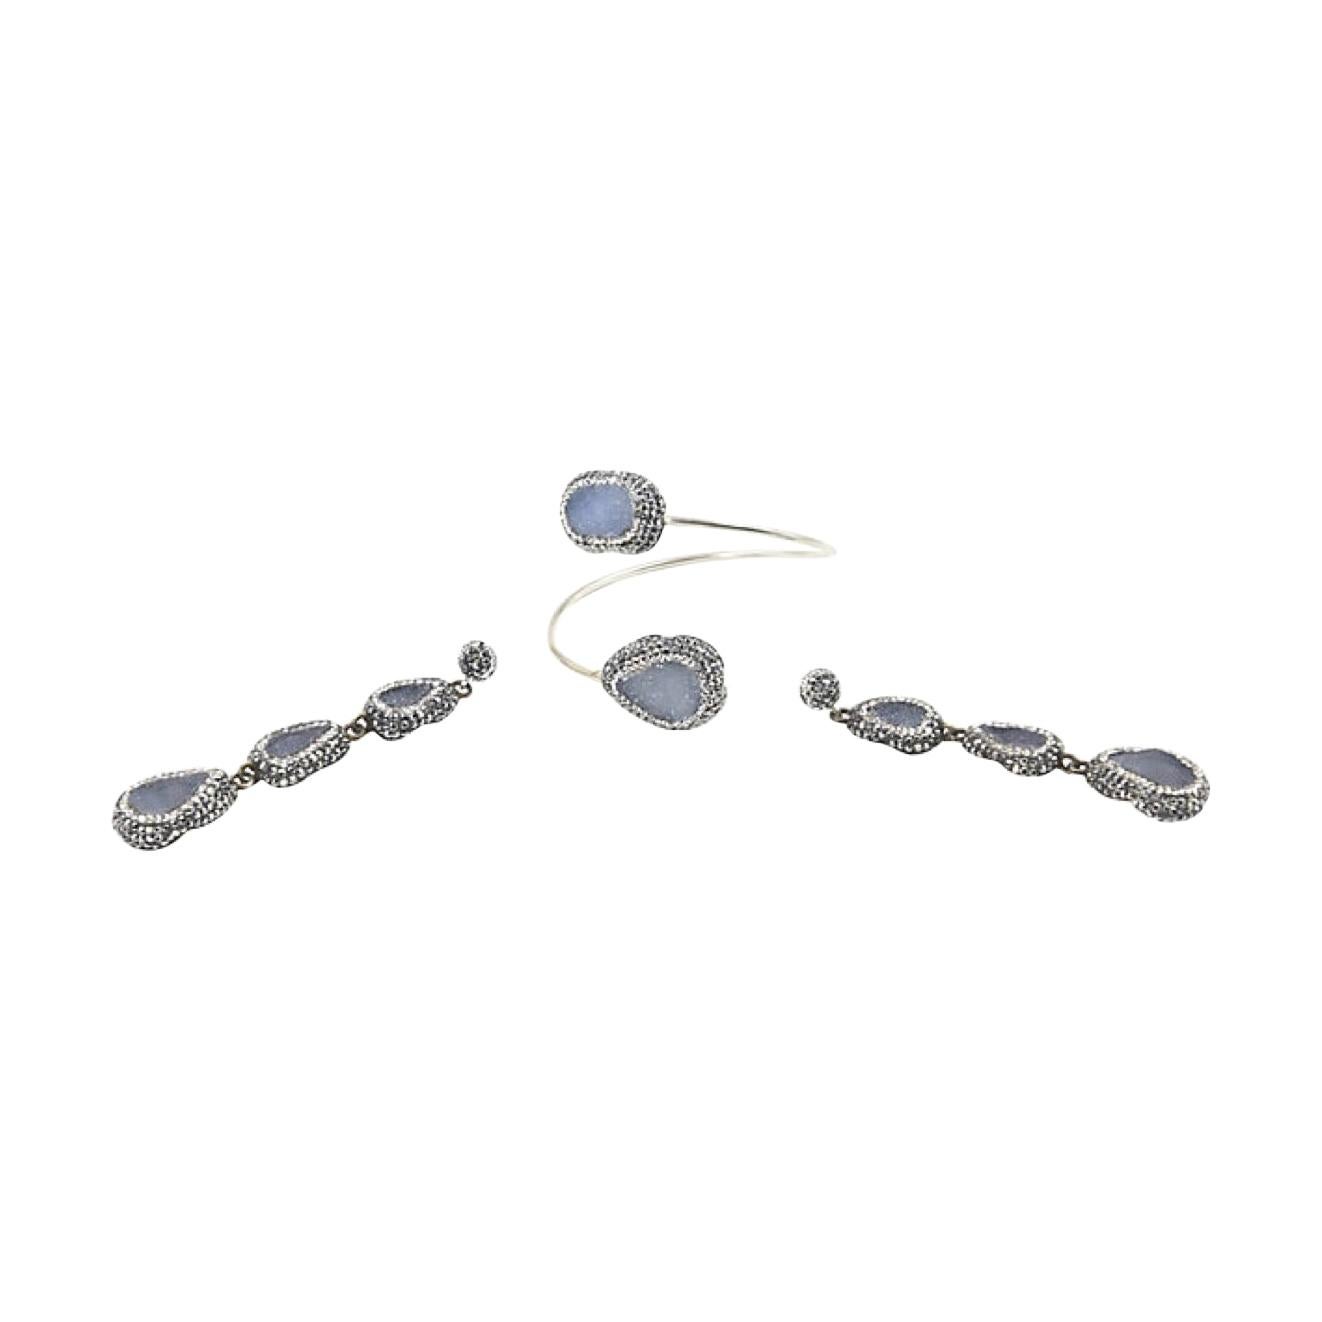 Blue Gray Druzy Crystal Silver Bracelet and Earrings For Sale